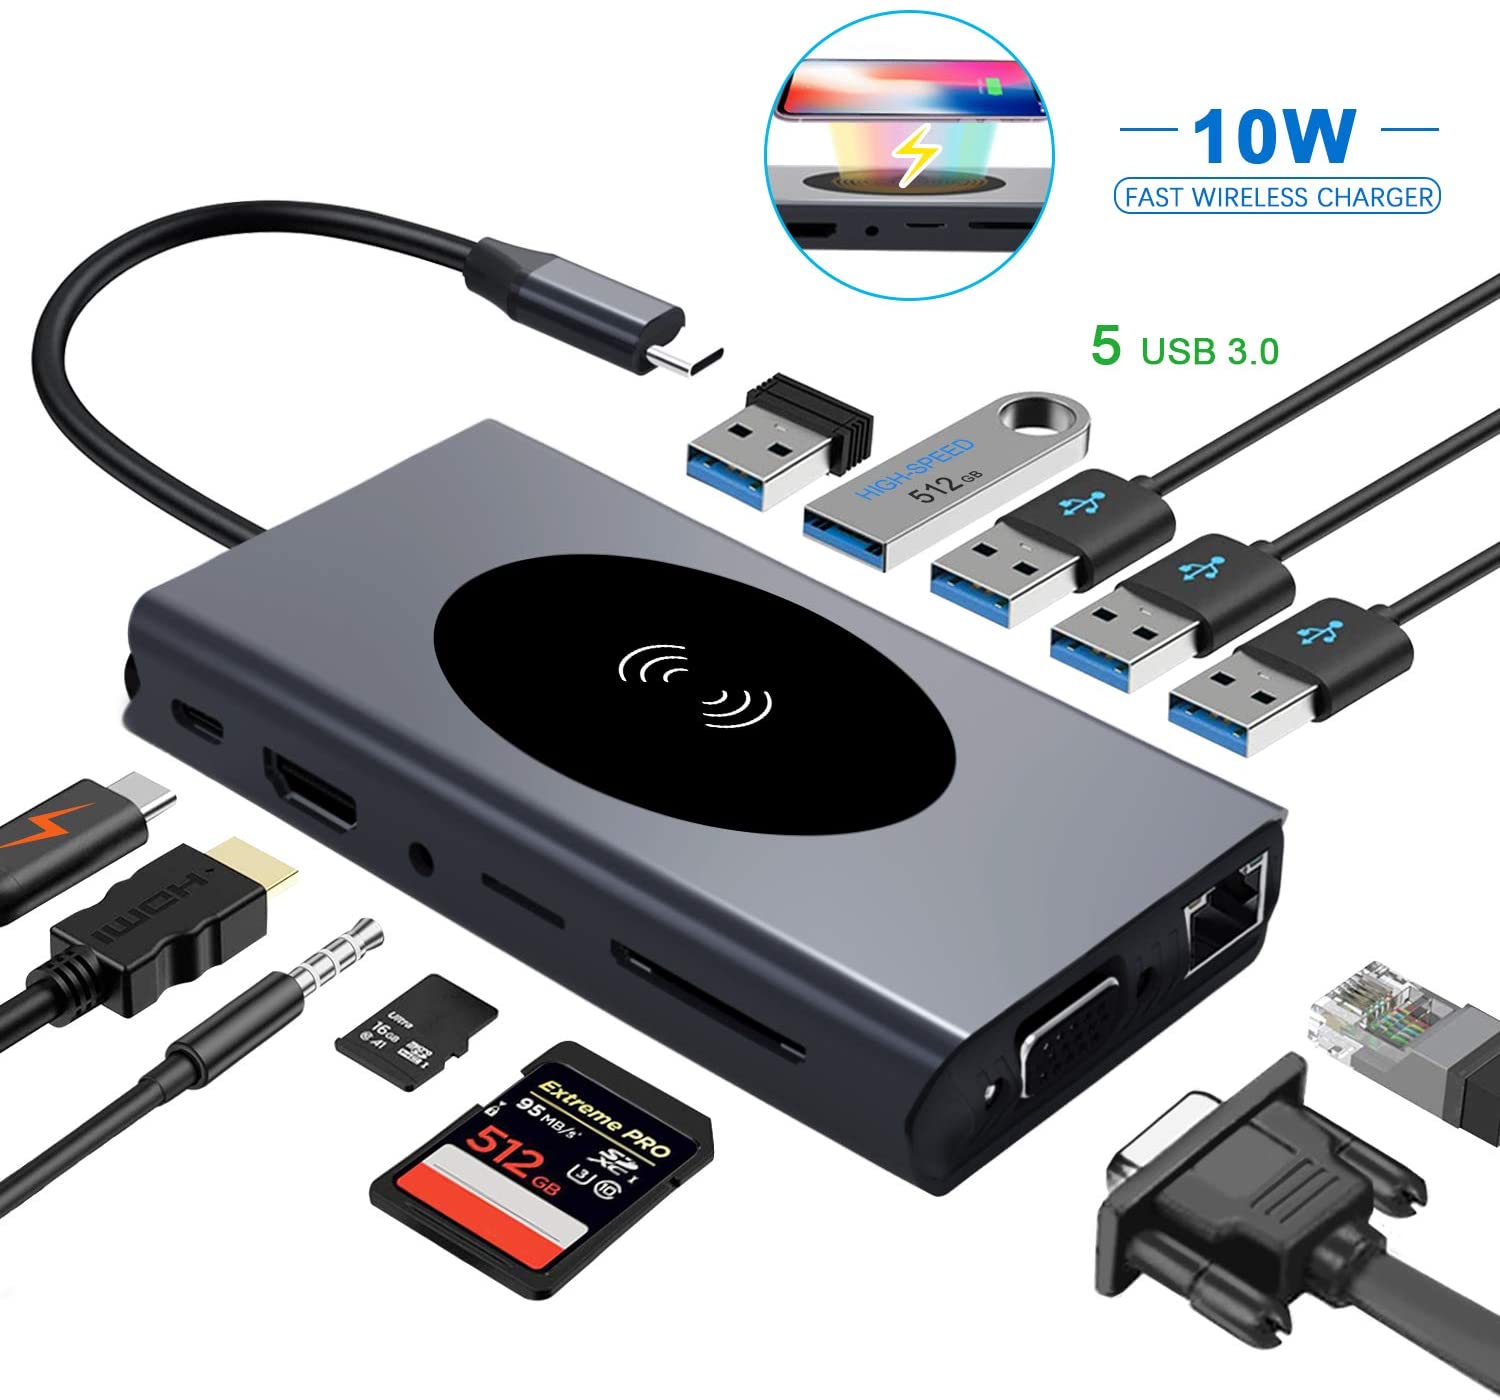 USB C Hub Laptop Docking Station, Wireless Charger 13-in-1 USB C Adapter with Ethernet, Power Delivery Laptop with 4K HDMI Output, 1000M RJ45 Ethernet, 60W PD, VGA, 5 USB 3.0 Ports, SD/TF Card Reader